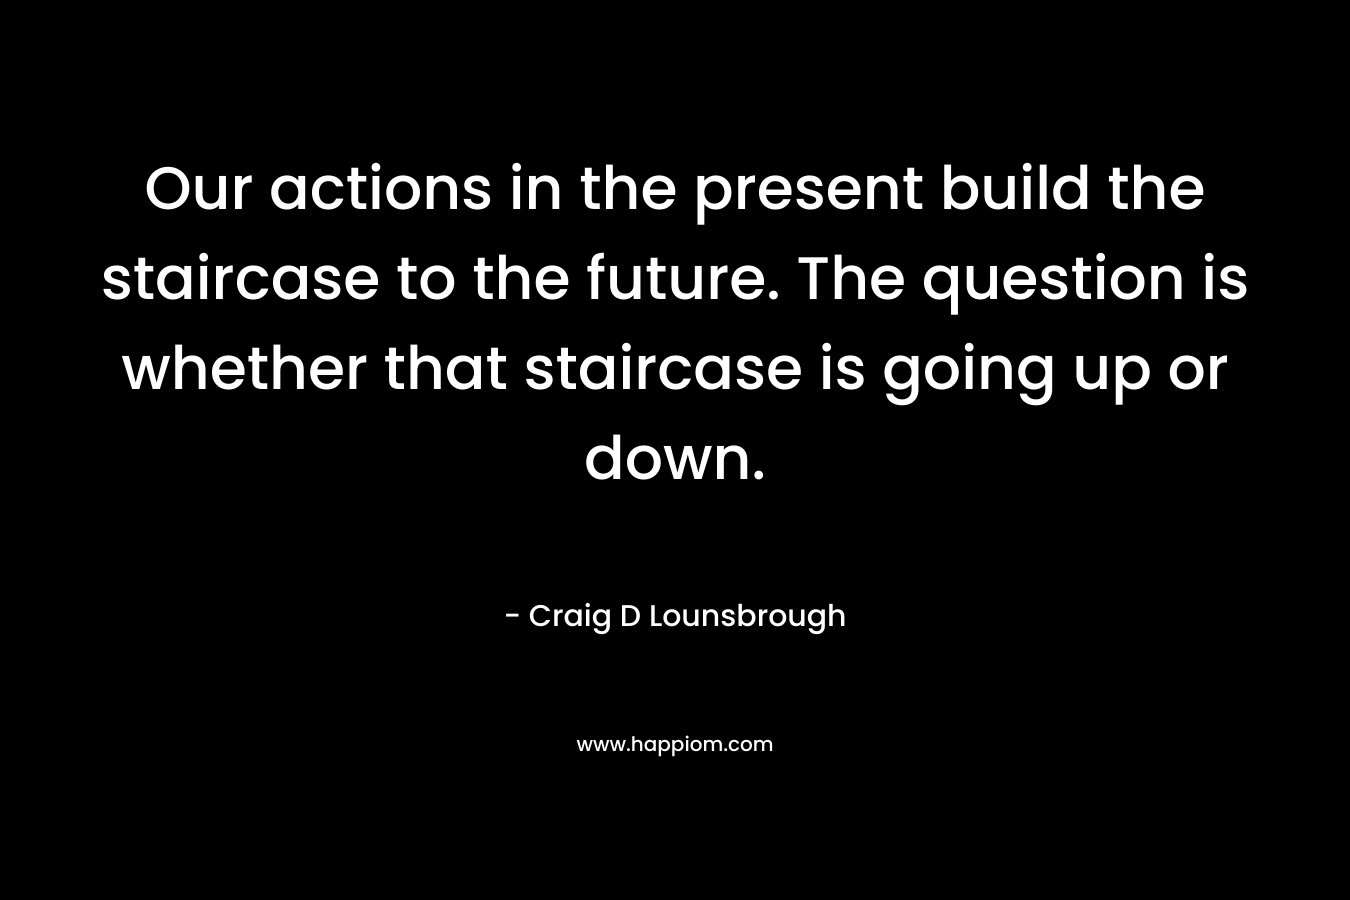 Our actions in the present build the staircase to the future. The question is whether that staircase is going up or down. – Craig D Lounsbrough